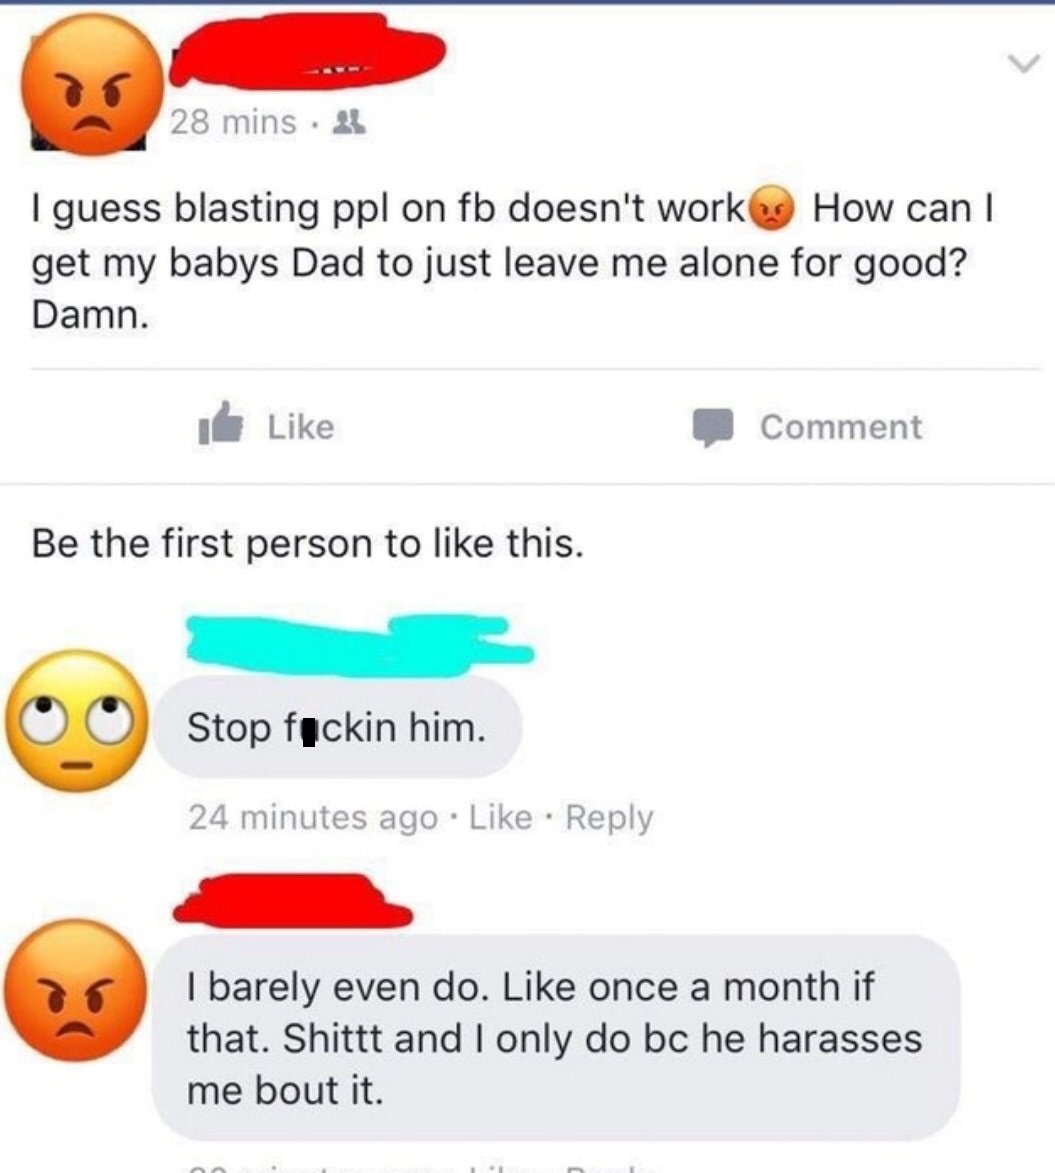 emoticon - 28 mins. 21 I guess blasting ppl on fb doesn't work How can I get my babys Dad to just leave me alone for good? Damn. Comment Be the first person to this. Stop fuckin him. 24 minutes ago I barely even do. once a month if that. Shittt and I only